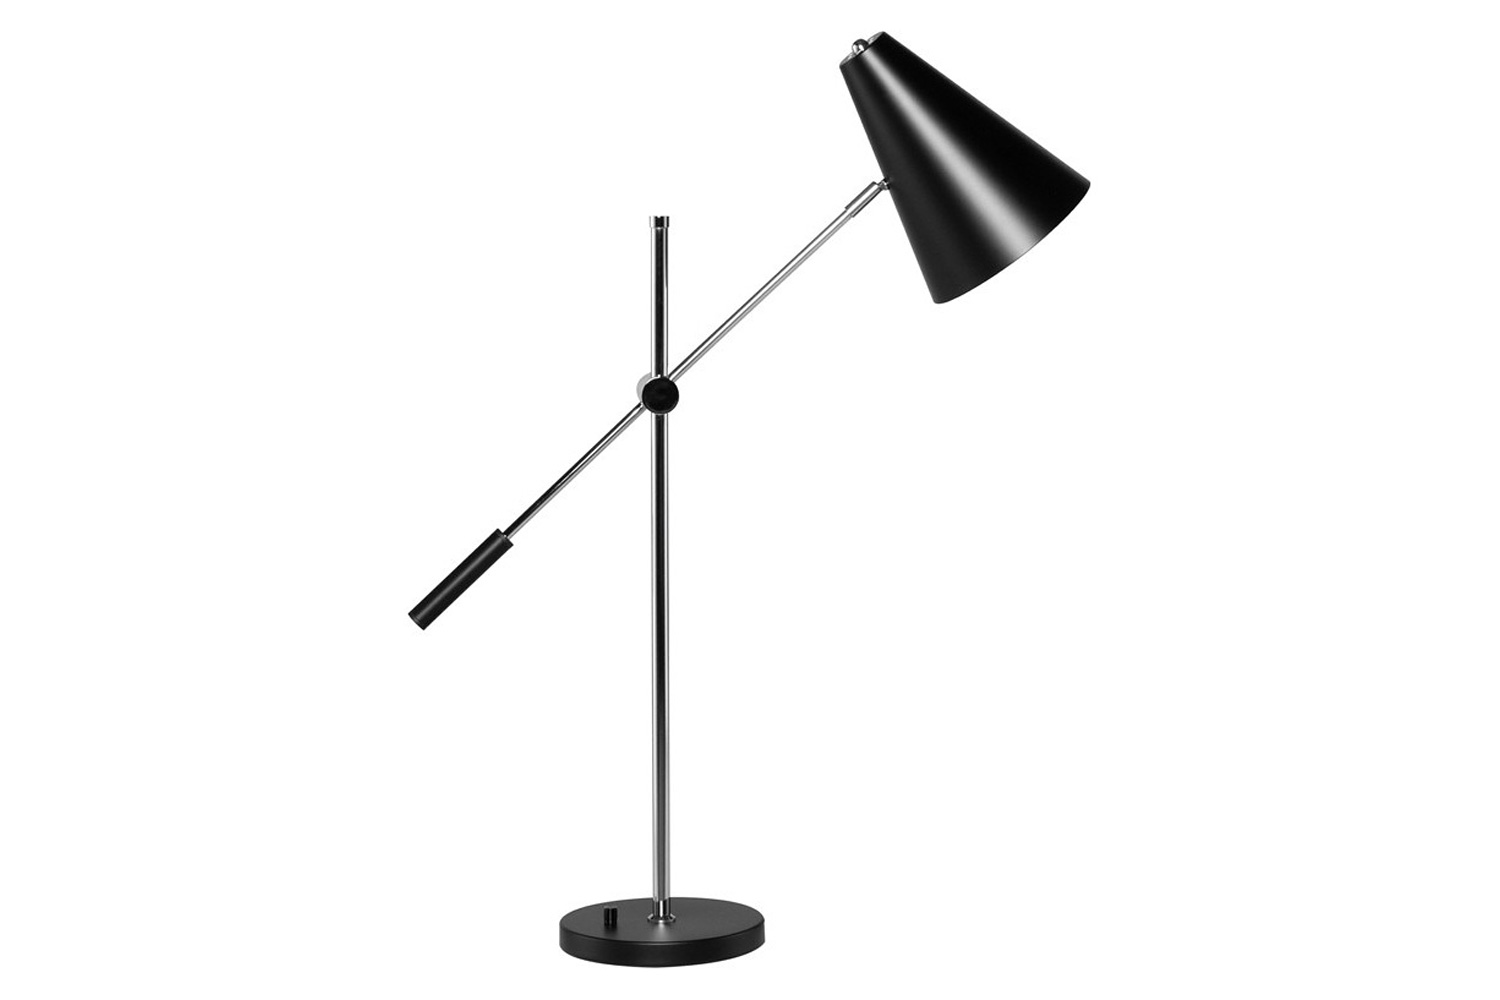 Nuevo™ Tivat Table Light - Matte Black Steel Shade - A stylish and modern black lamp for the office